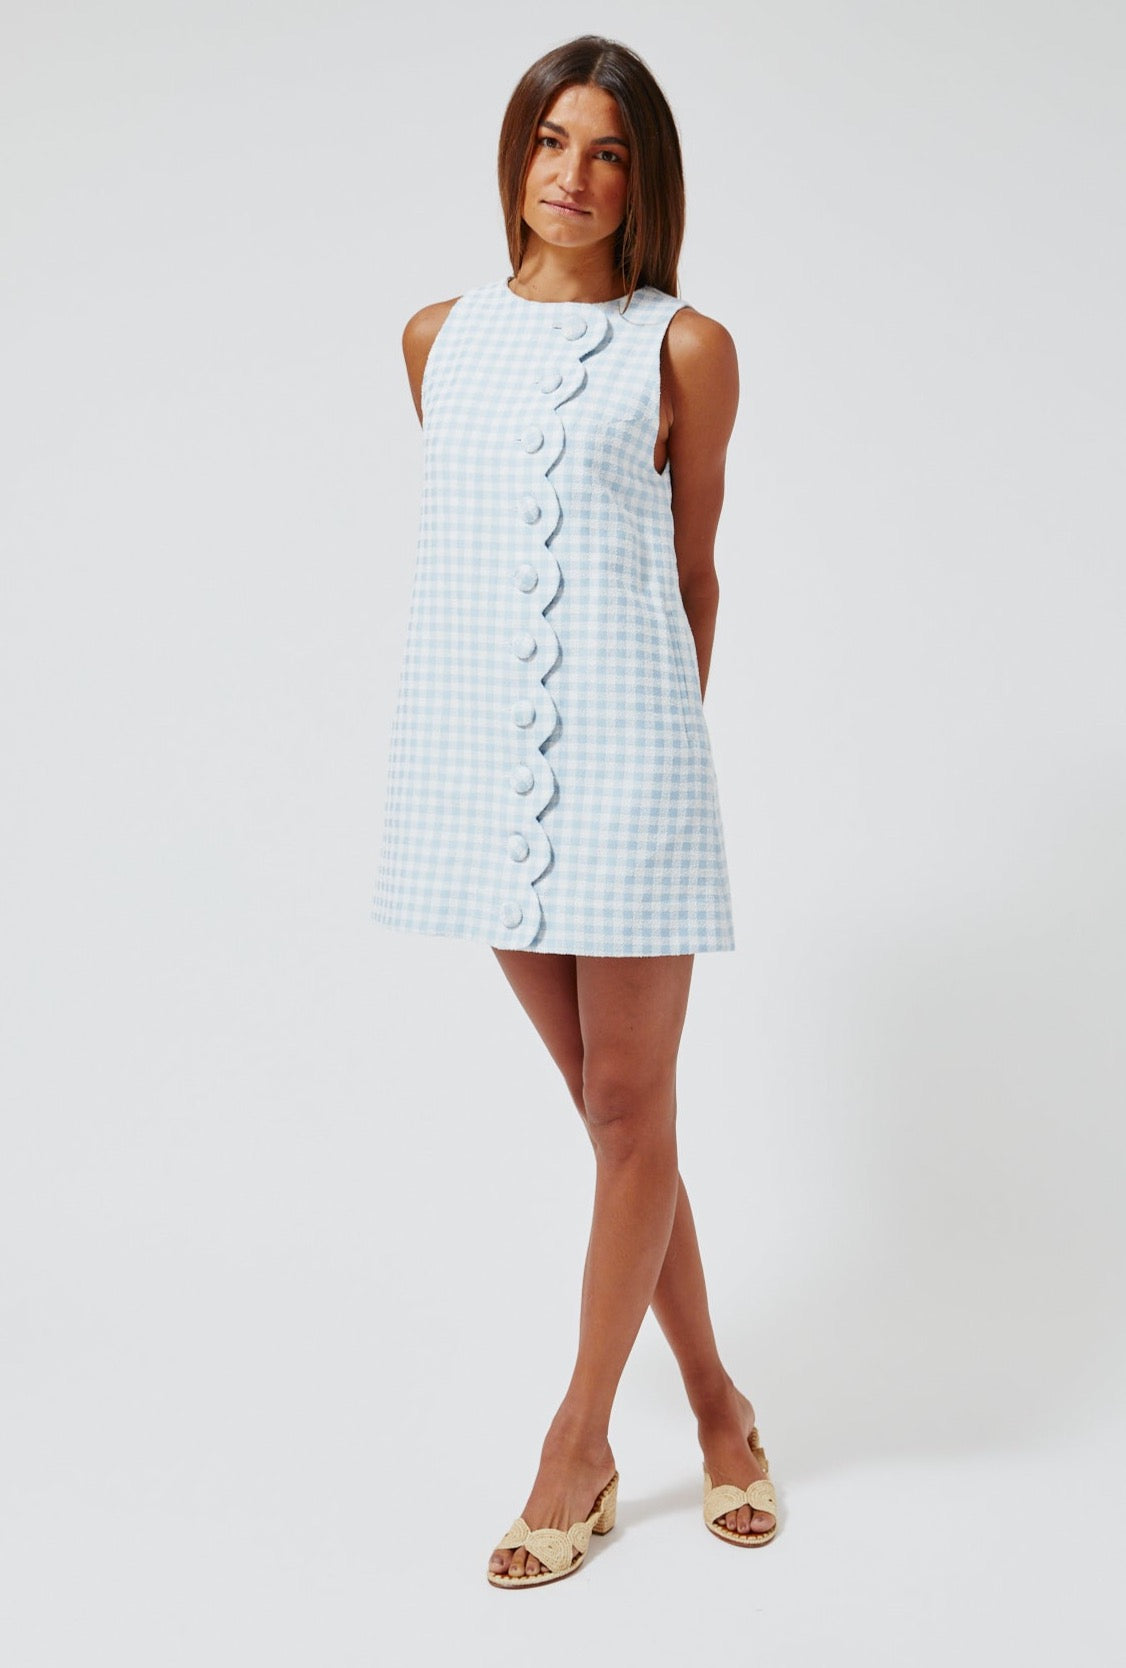 THE SCALLOP MINI DRESS in BLUE GINGHAM BOUCLE COTTON